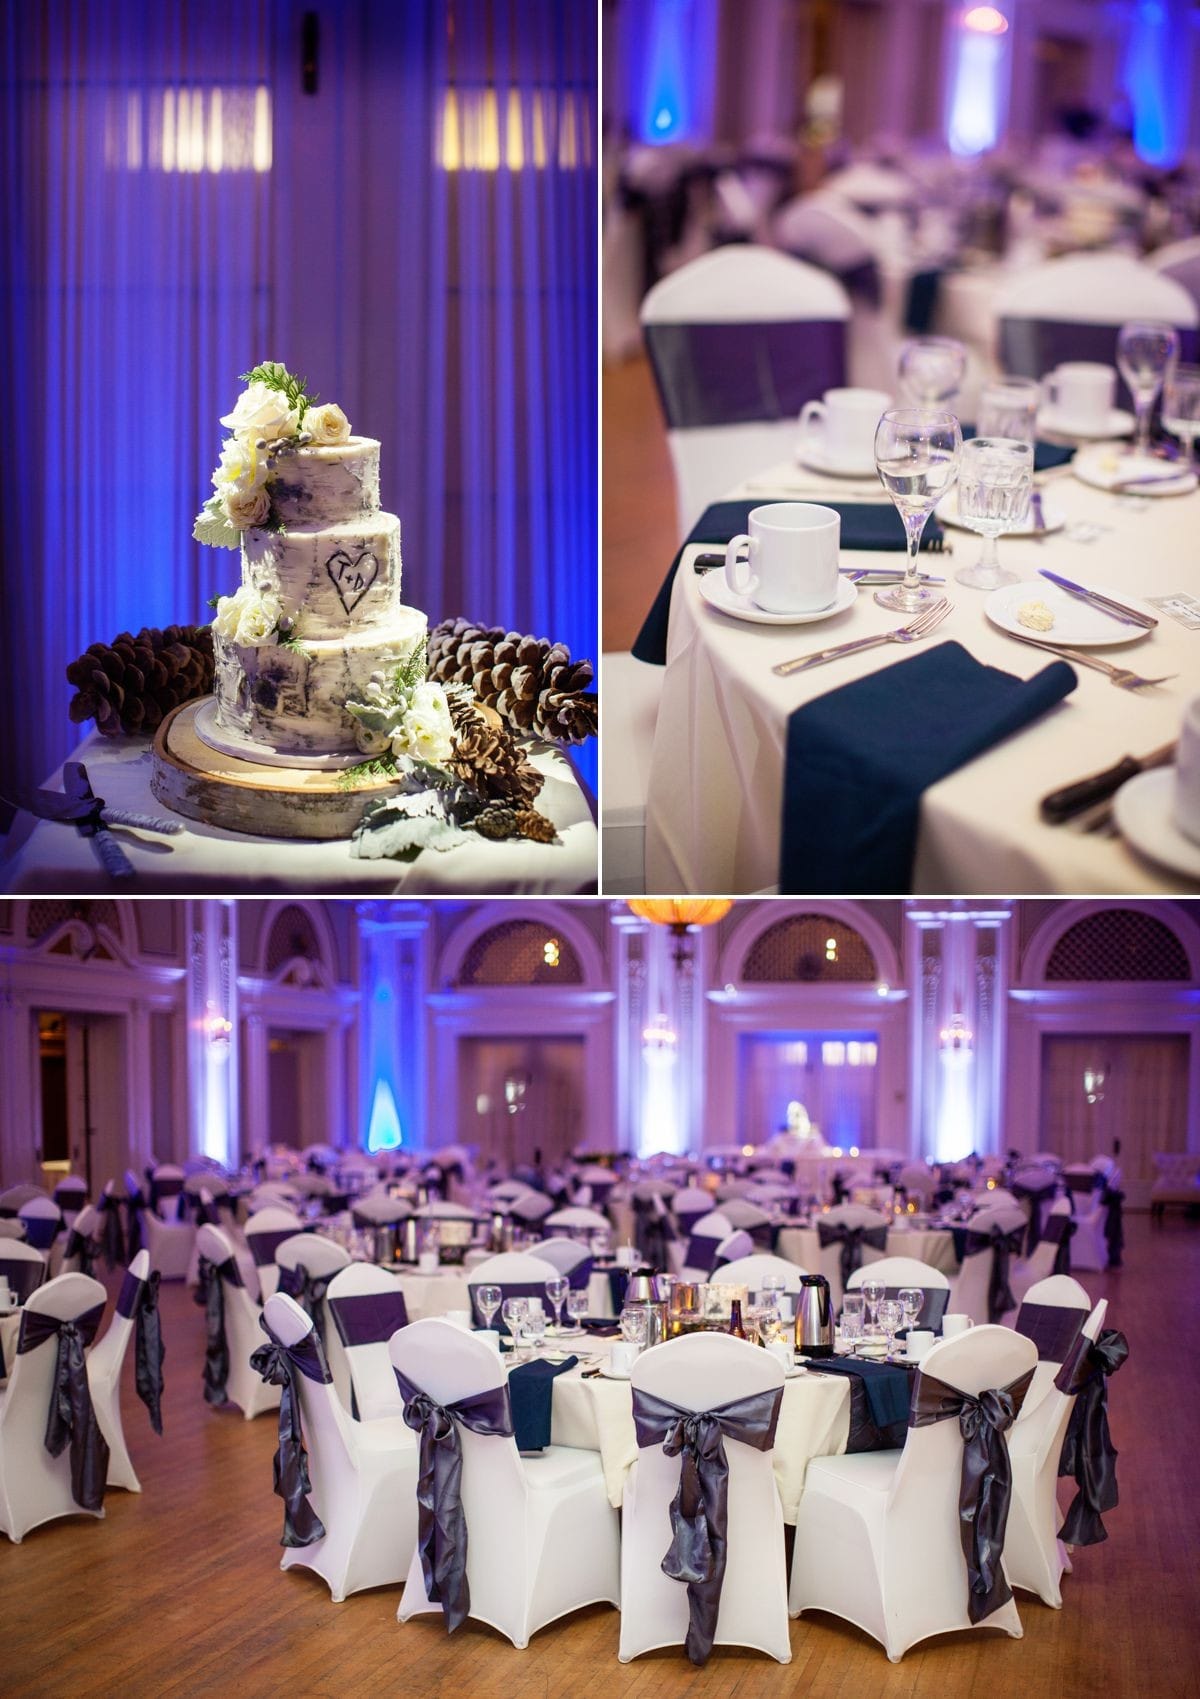 Wedding lighting at Greysolon Ballroom. Up lighting in blue and Ice Blue. Pin spot on cake. Photo by Al & Lyndsey On3 Photography.